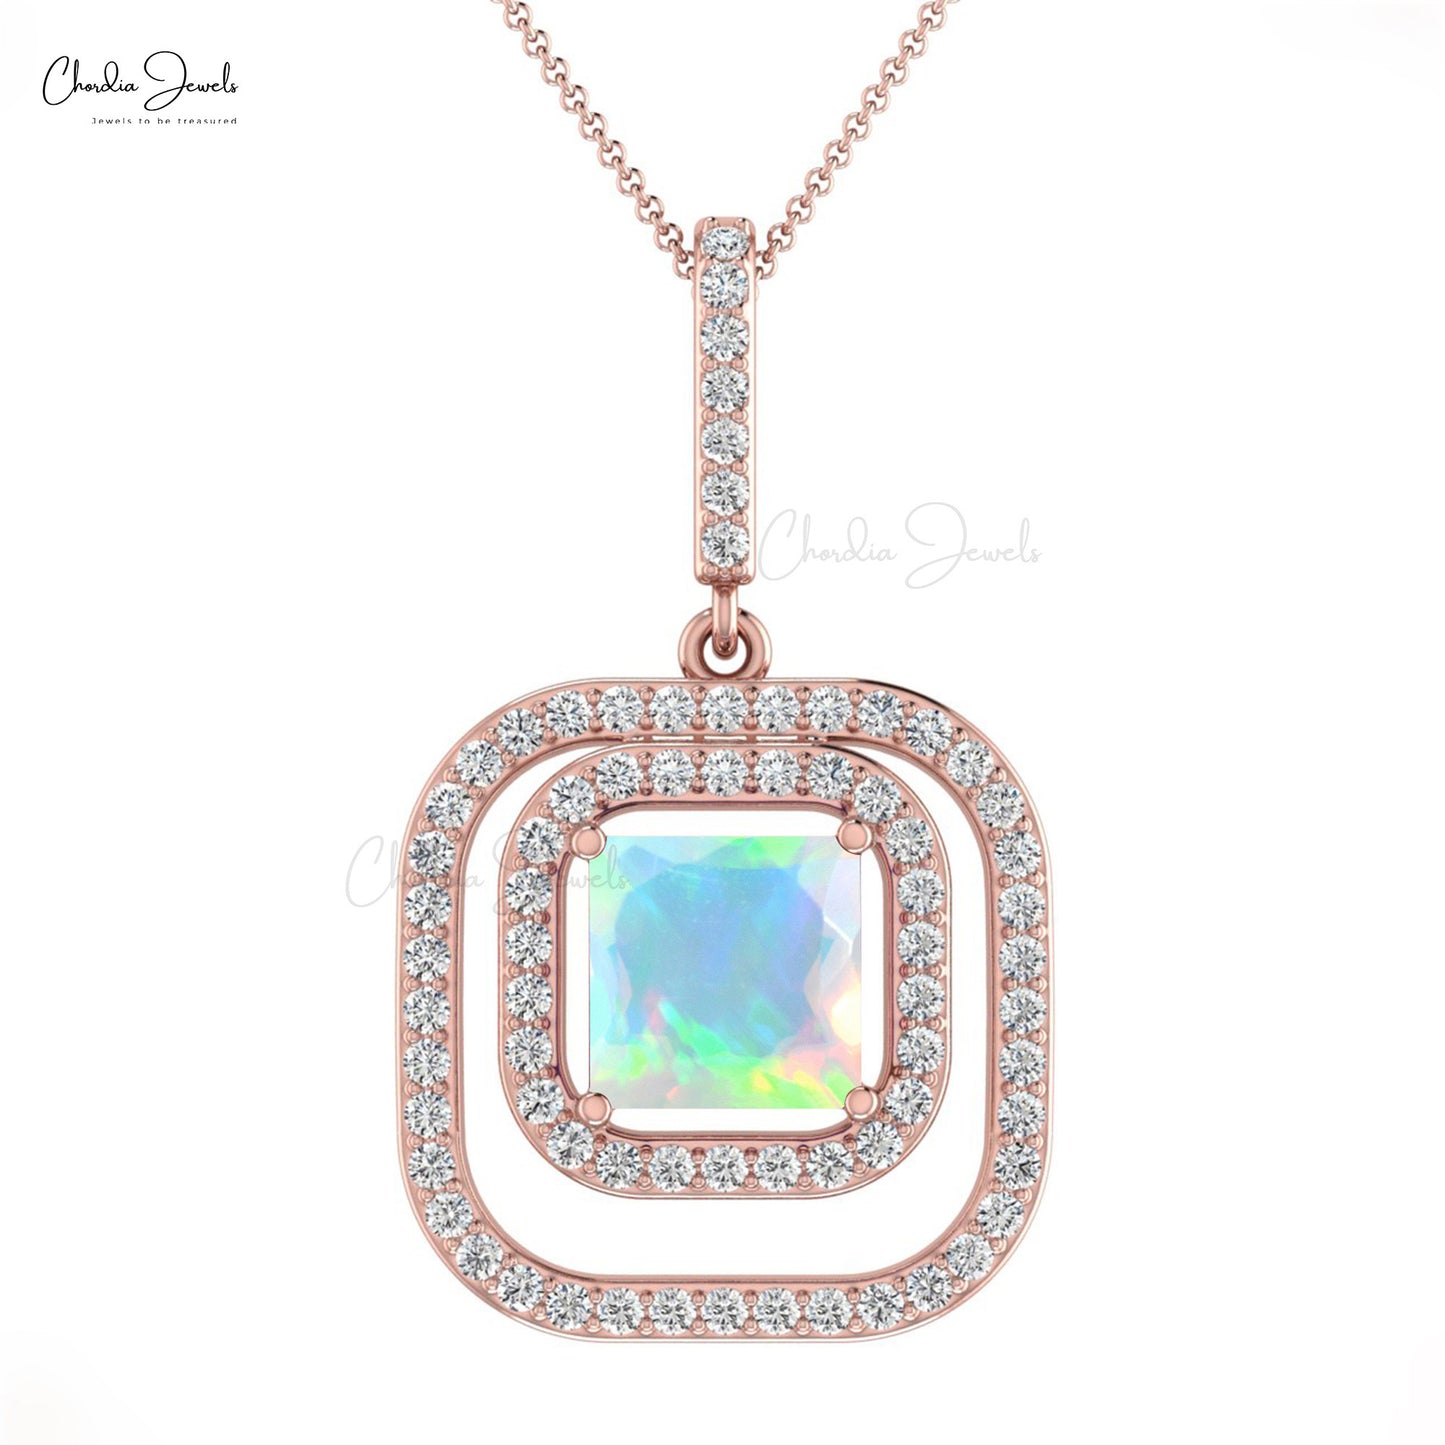 Beautiful Lovely Double Halo Pendant Studded With White Diamonds Natural Fire Opal Pendant Necklace in 14k Pure Gold Mother's Day Gift